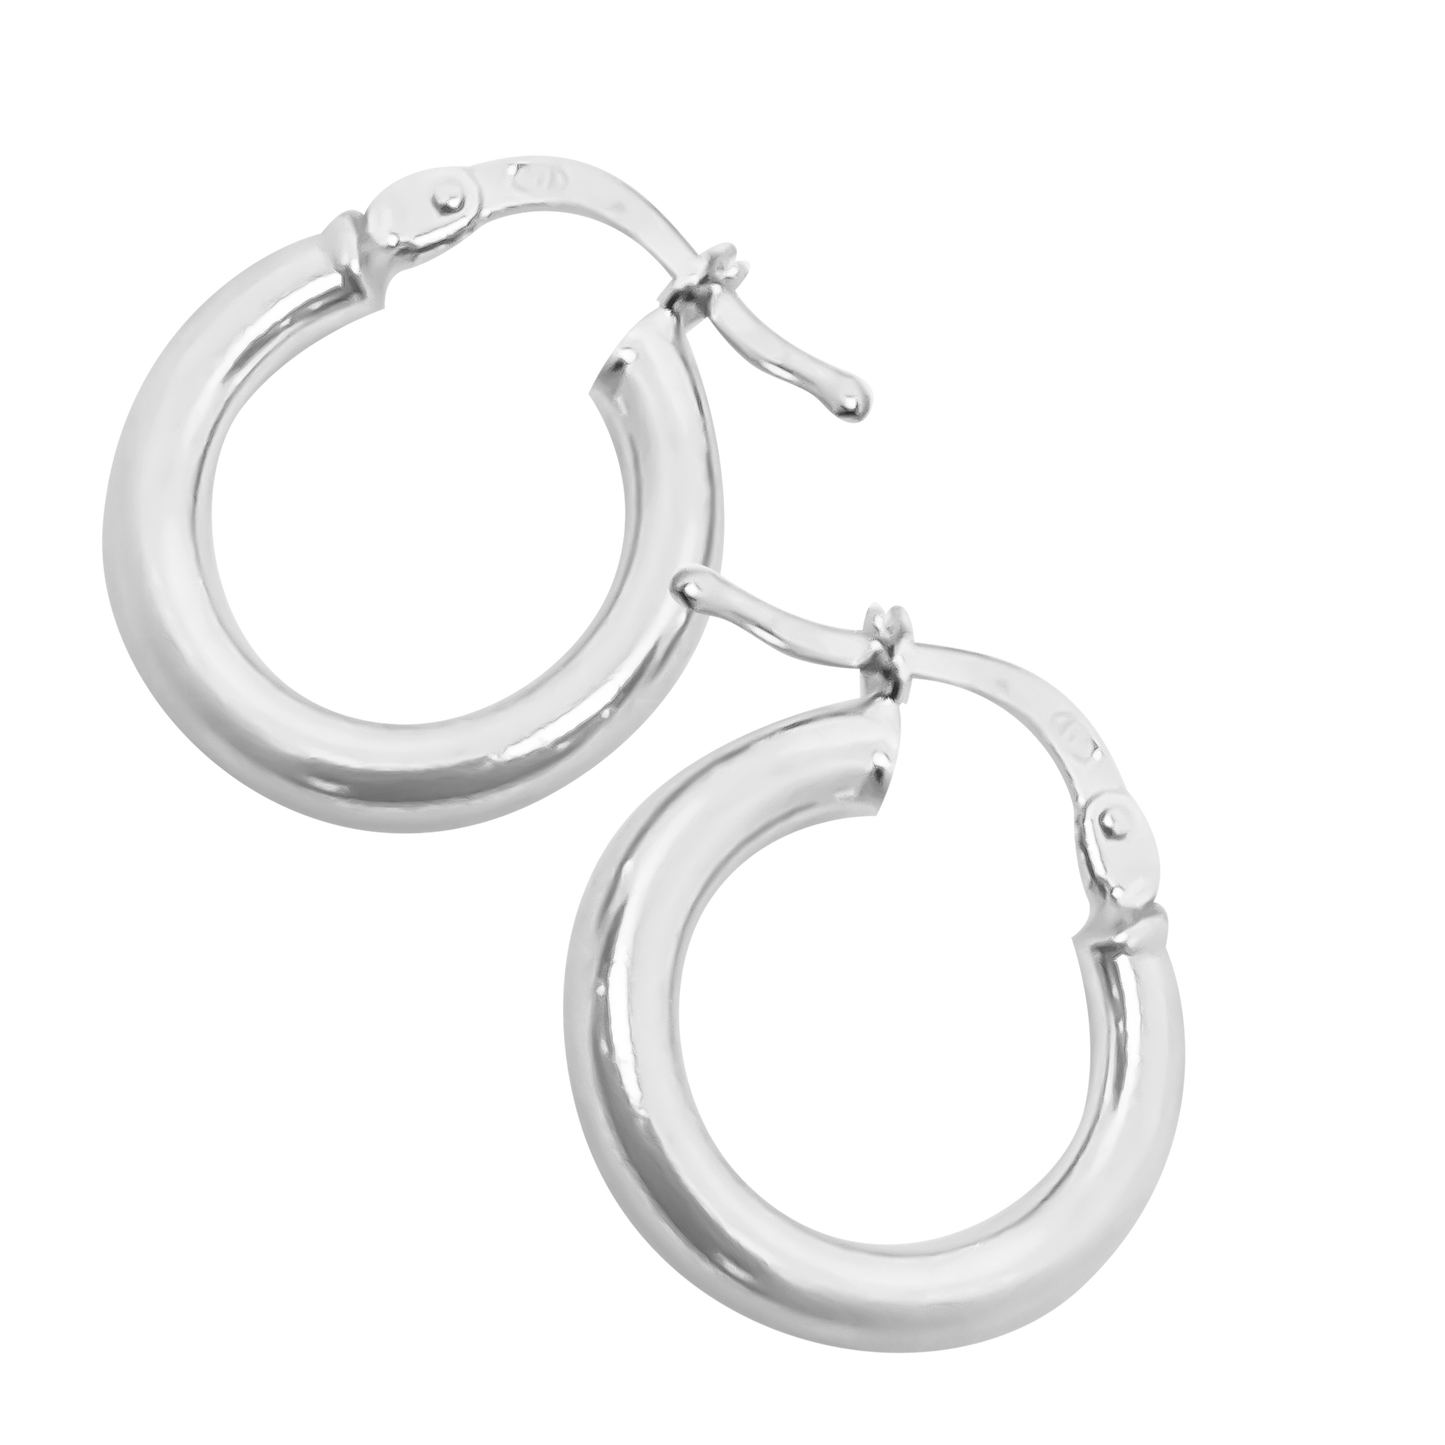 1.2cm Small Hoops in 925 Sterling Silver